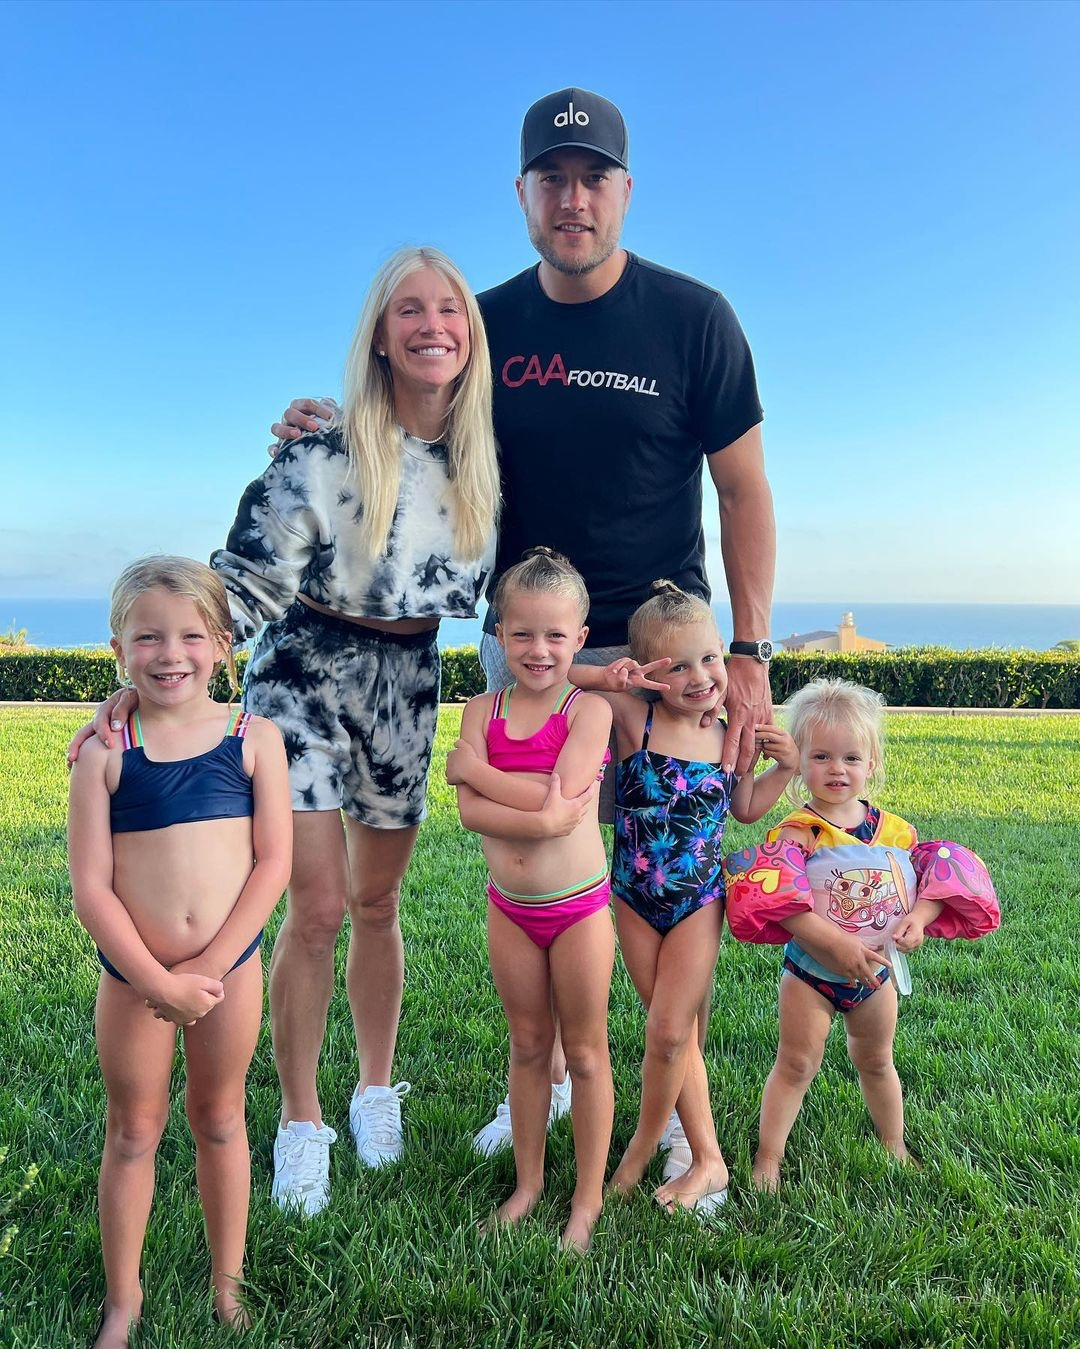 Rams QB Matthew Stafford Reacts to Wife Kelly's Team Dynamic Comments